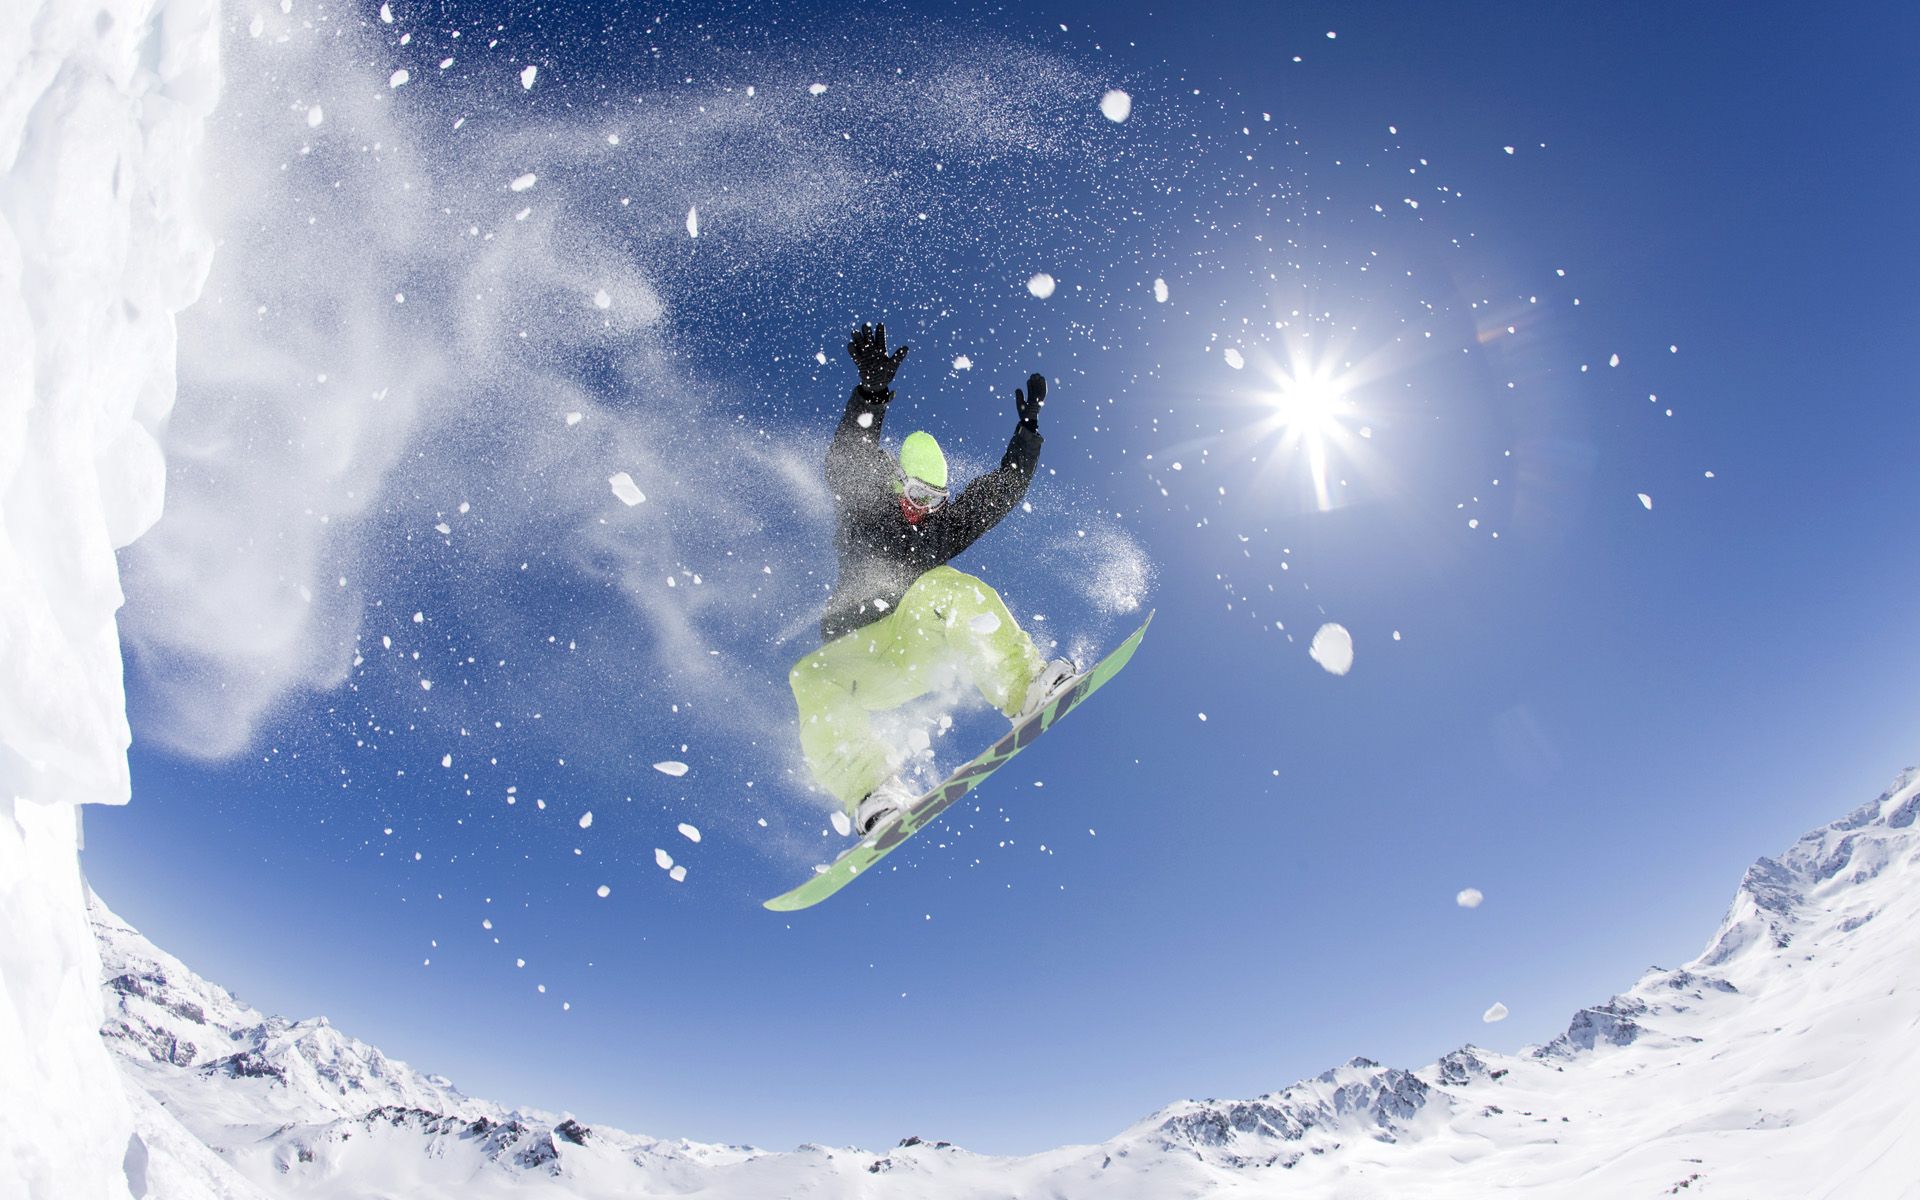 Snowboarding Wallpapers | HD Wallpapers